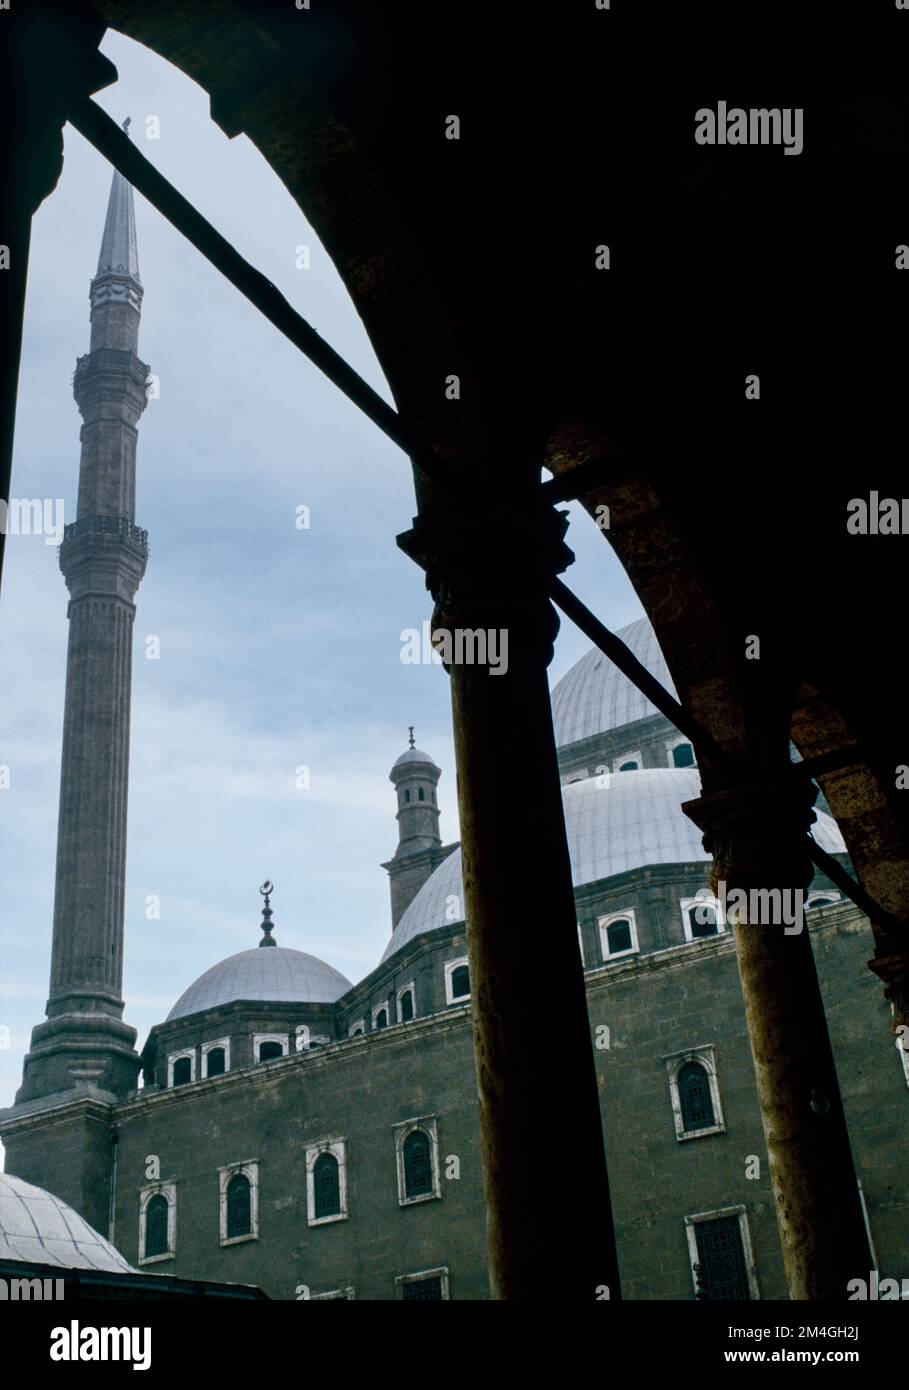 Mohamed  Ali mosque  in Cairo, Egypt. Archival scan from a slide. February 1987. Stock Photo